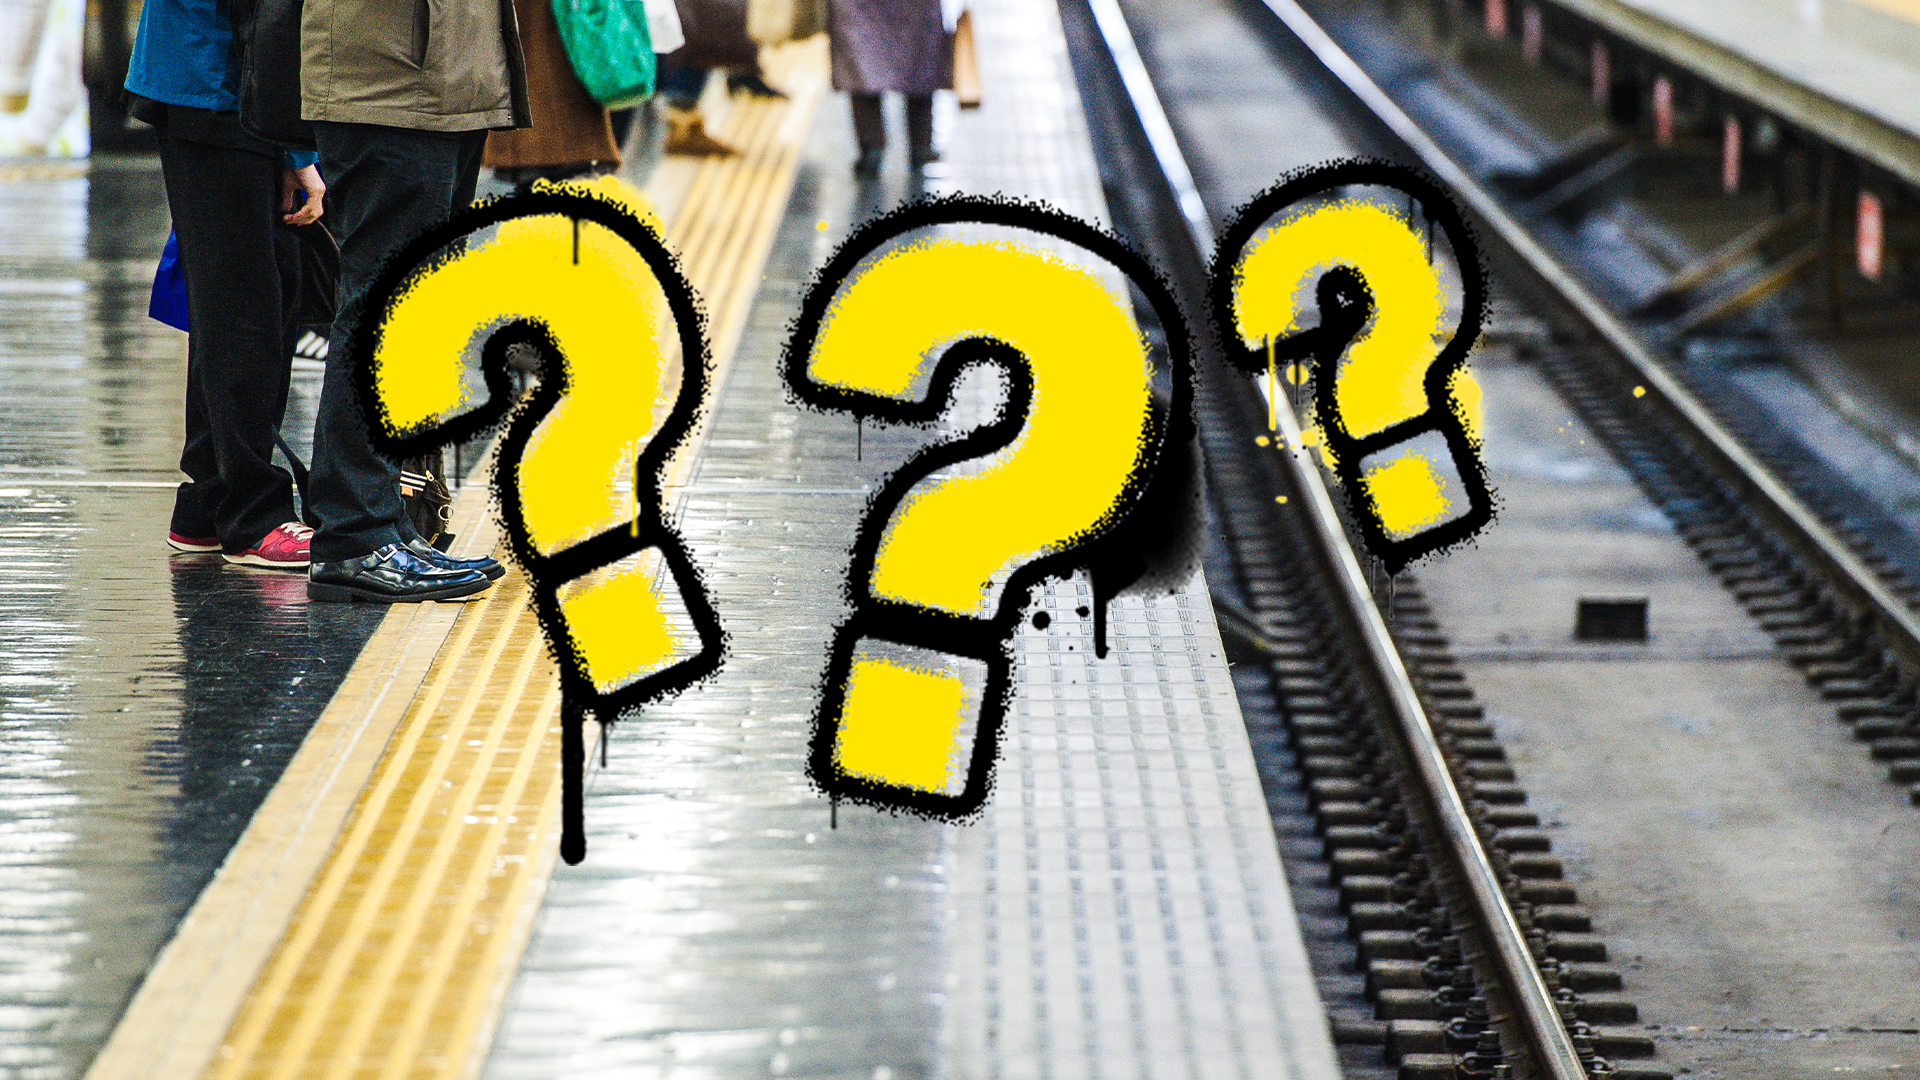 A train platform and question marks